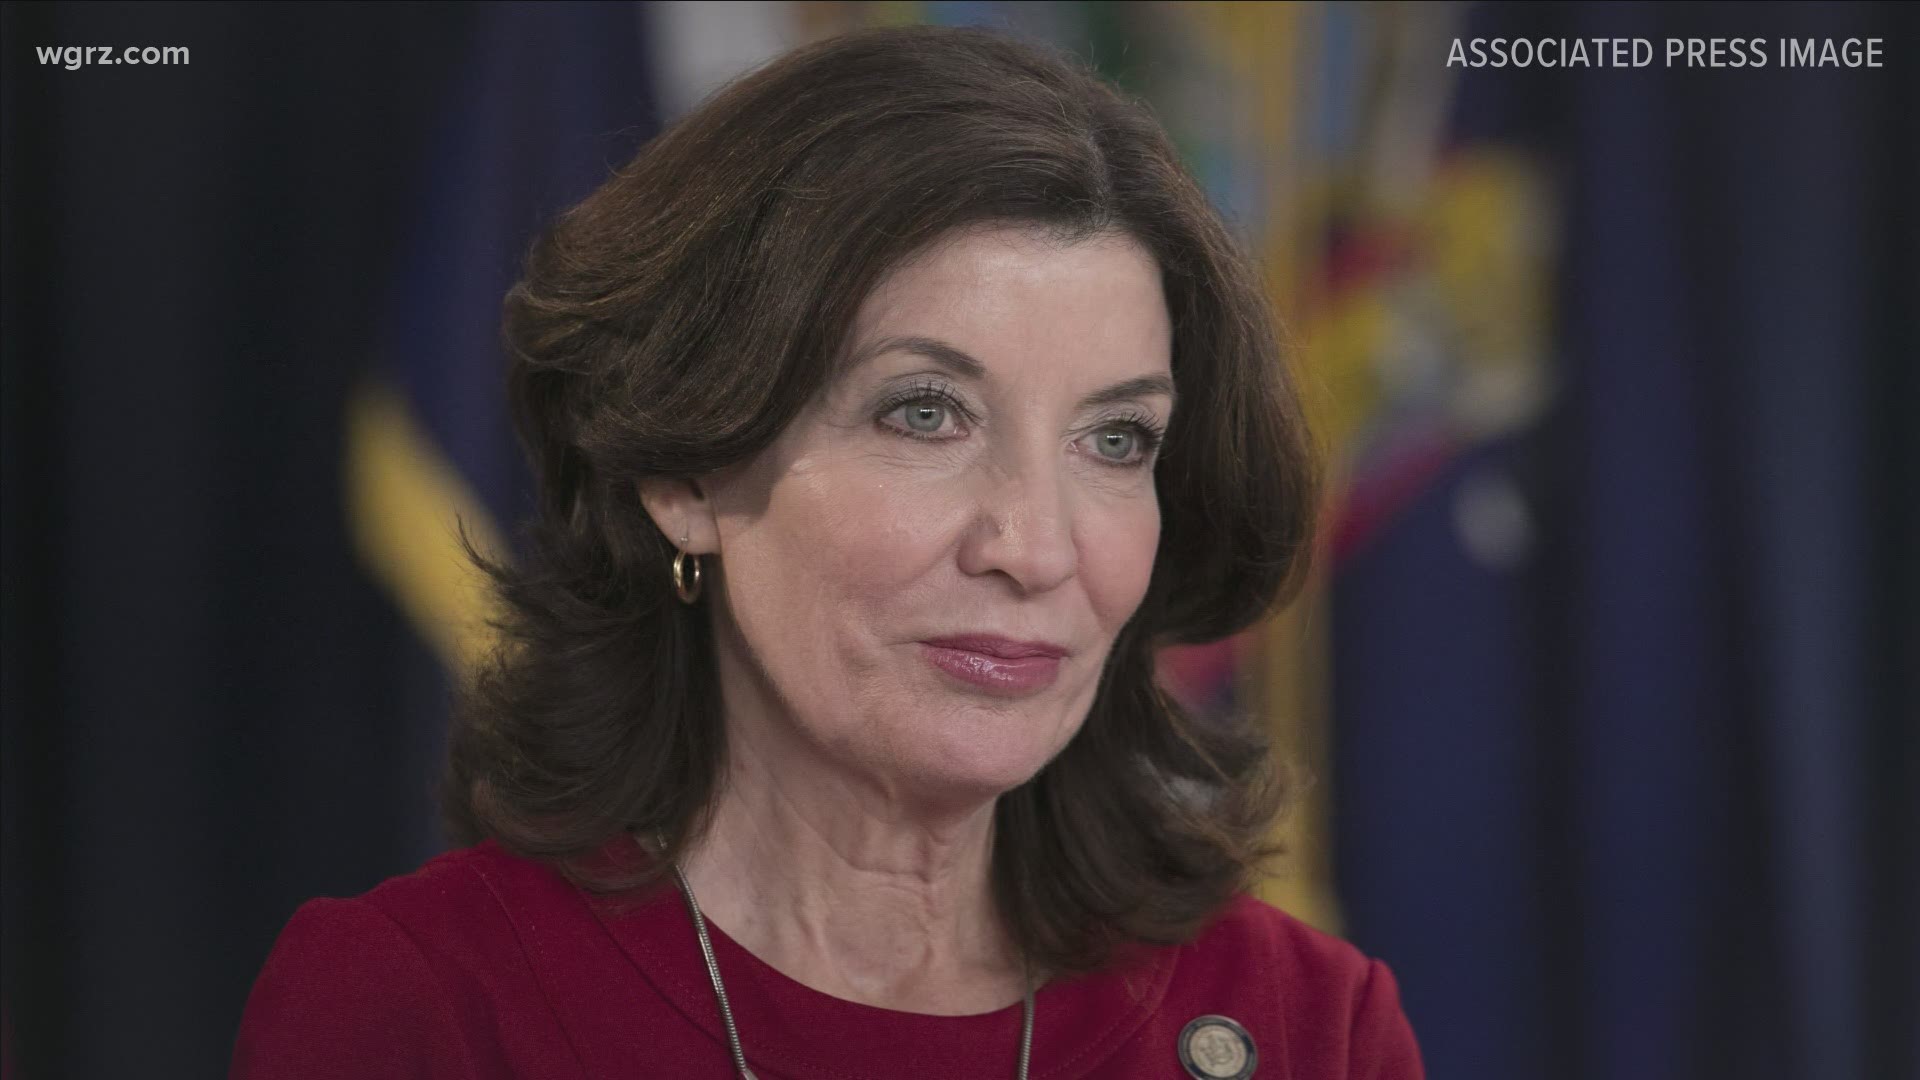 The lieutenant governor's office would not make her available to speak on camera, but her press secretary did respond with answers to questions viewers had.